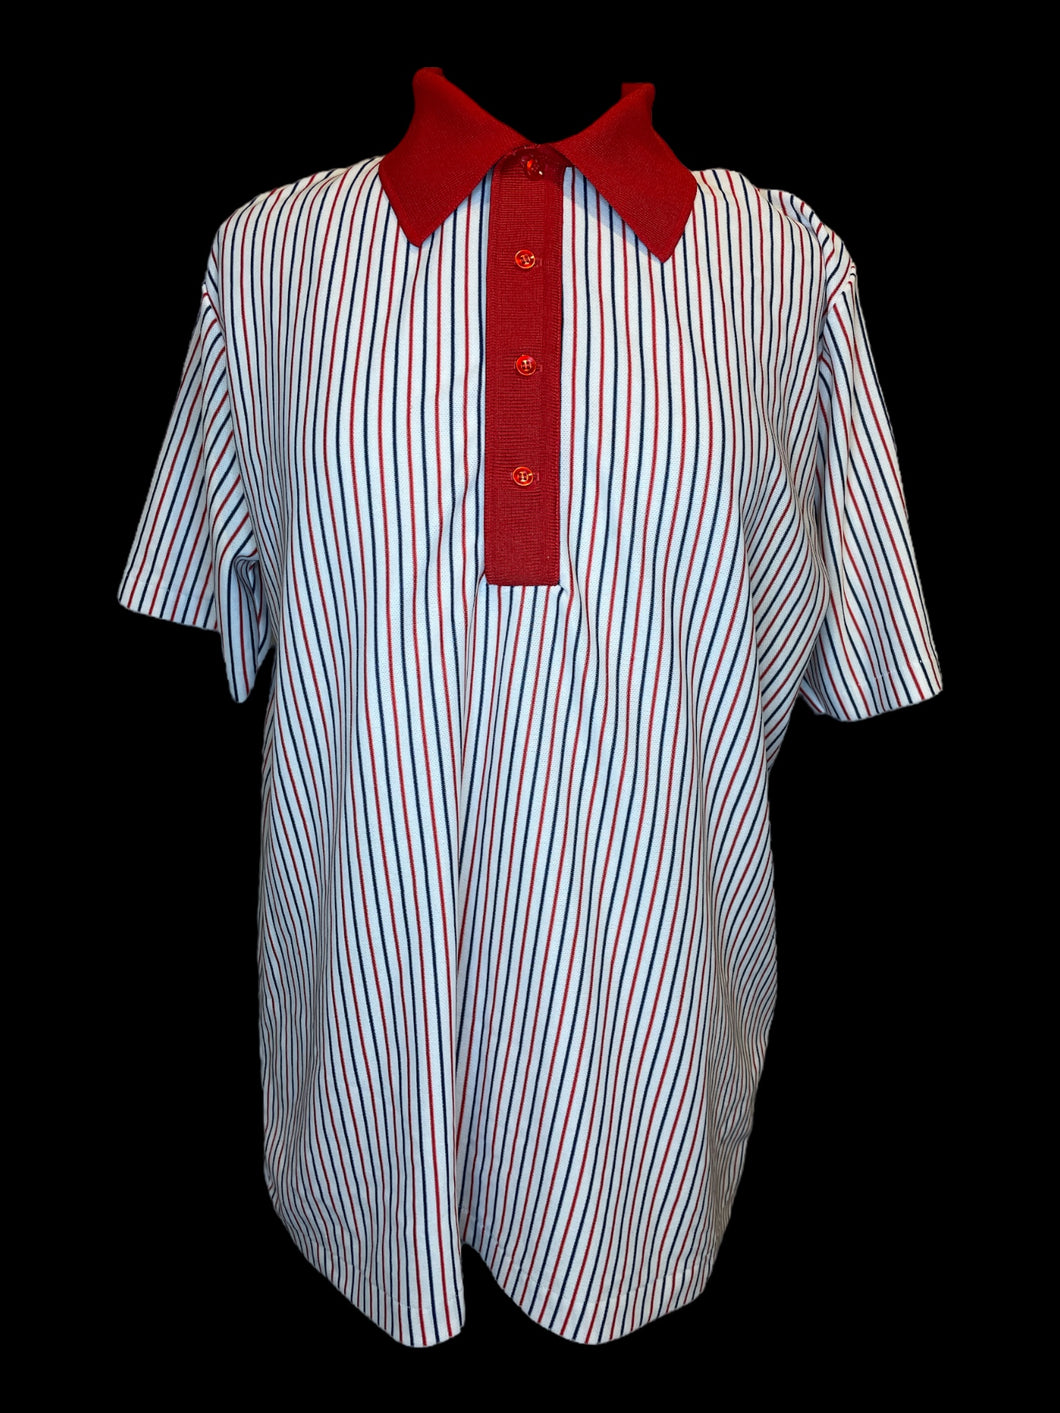 0X Vintage white, red, & blue pinstripe short sleeve polo top w/ red collar